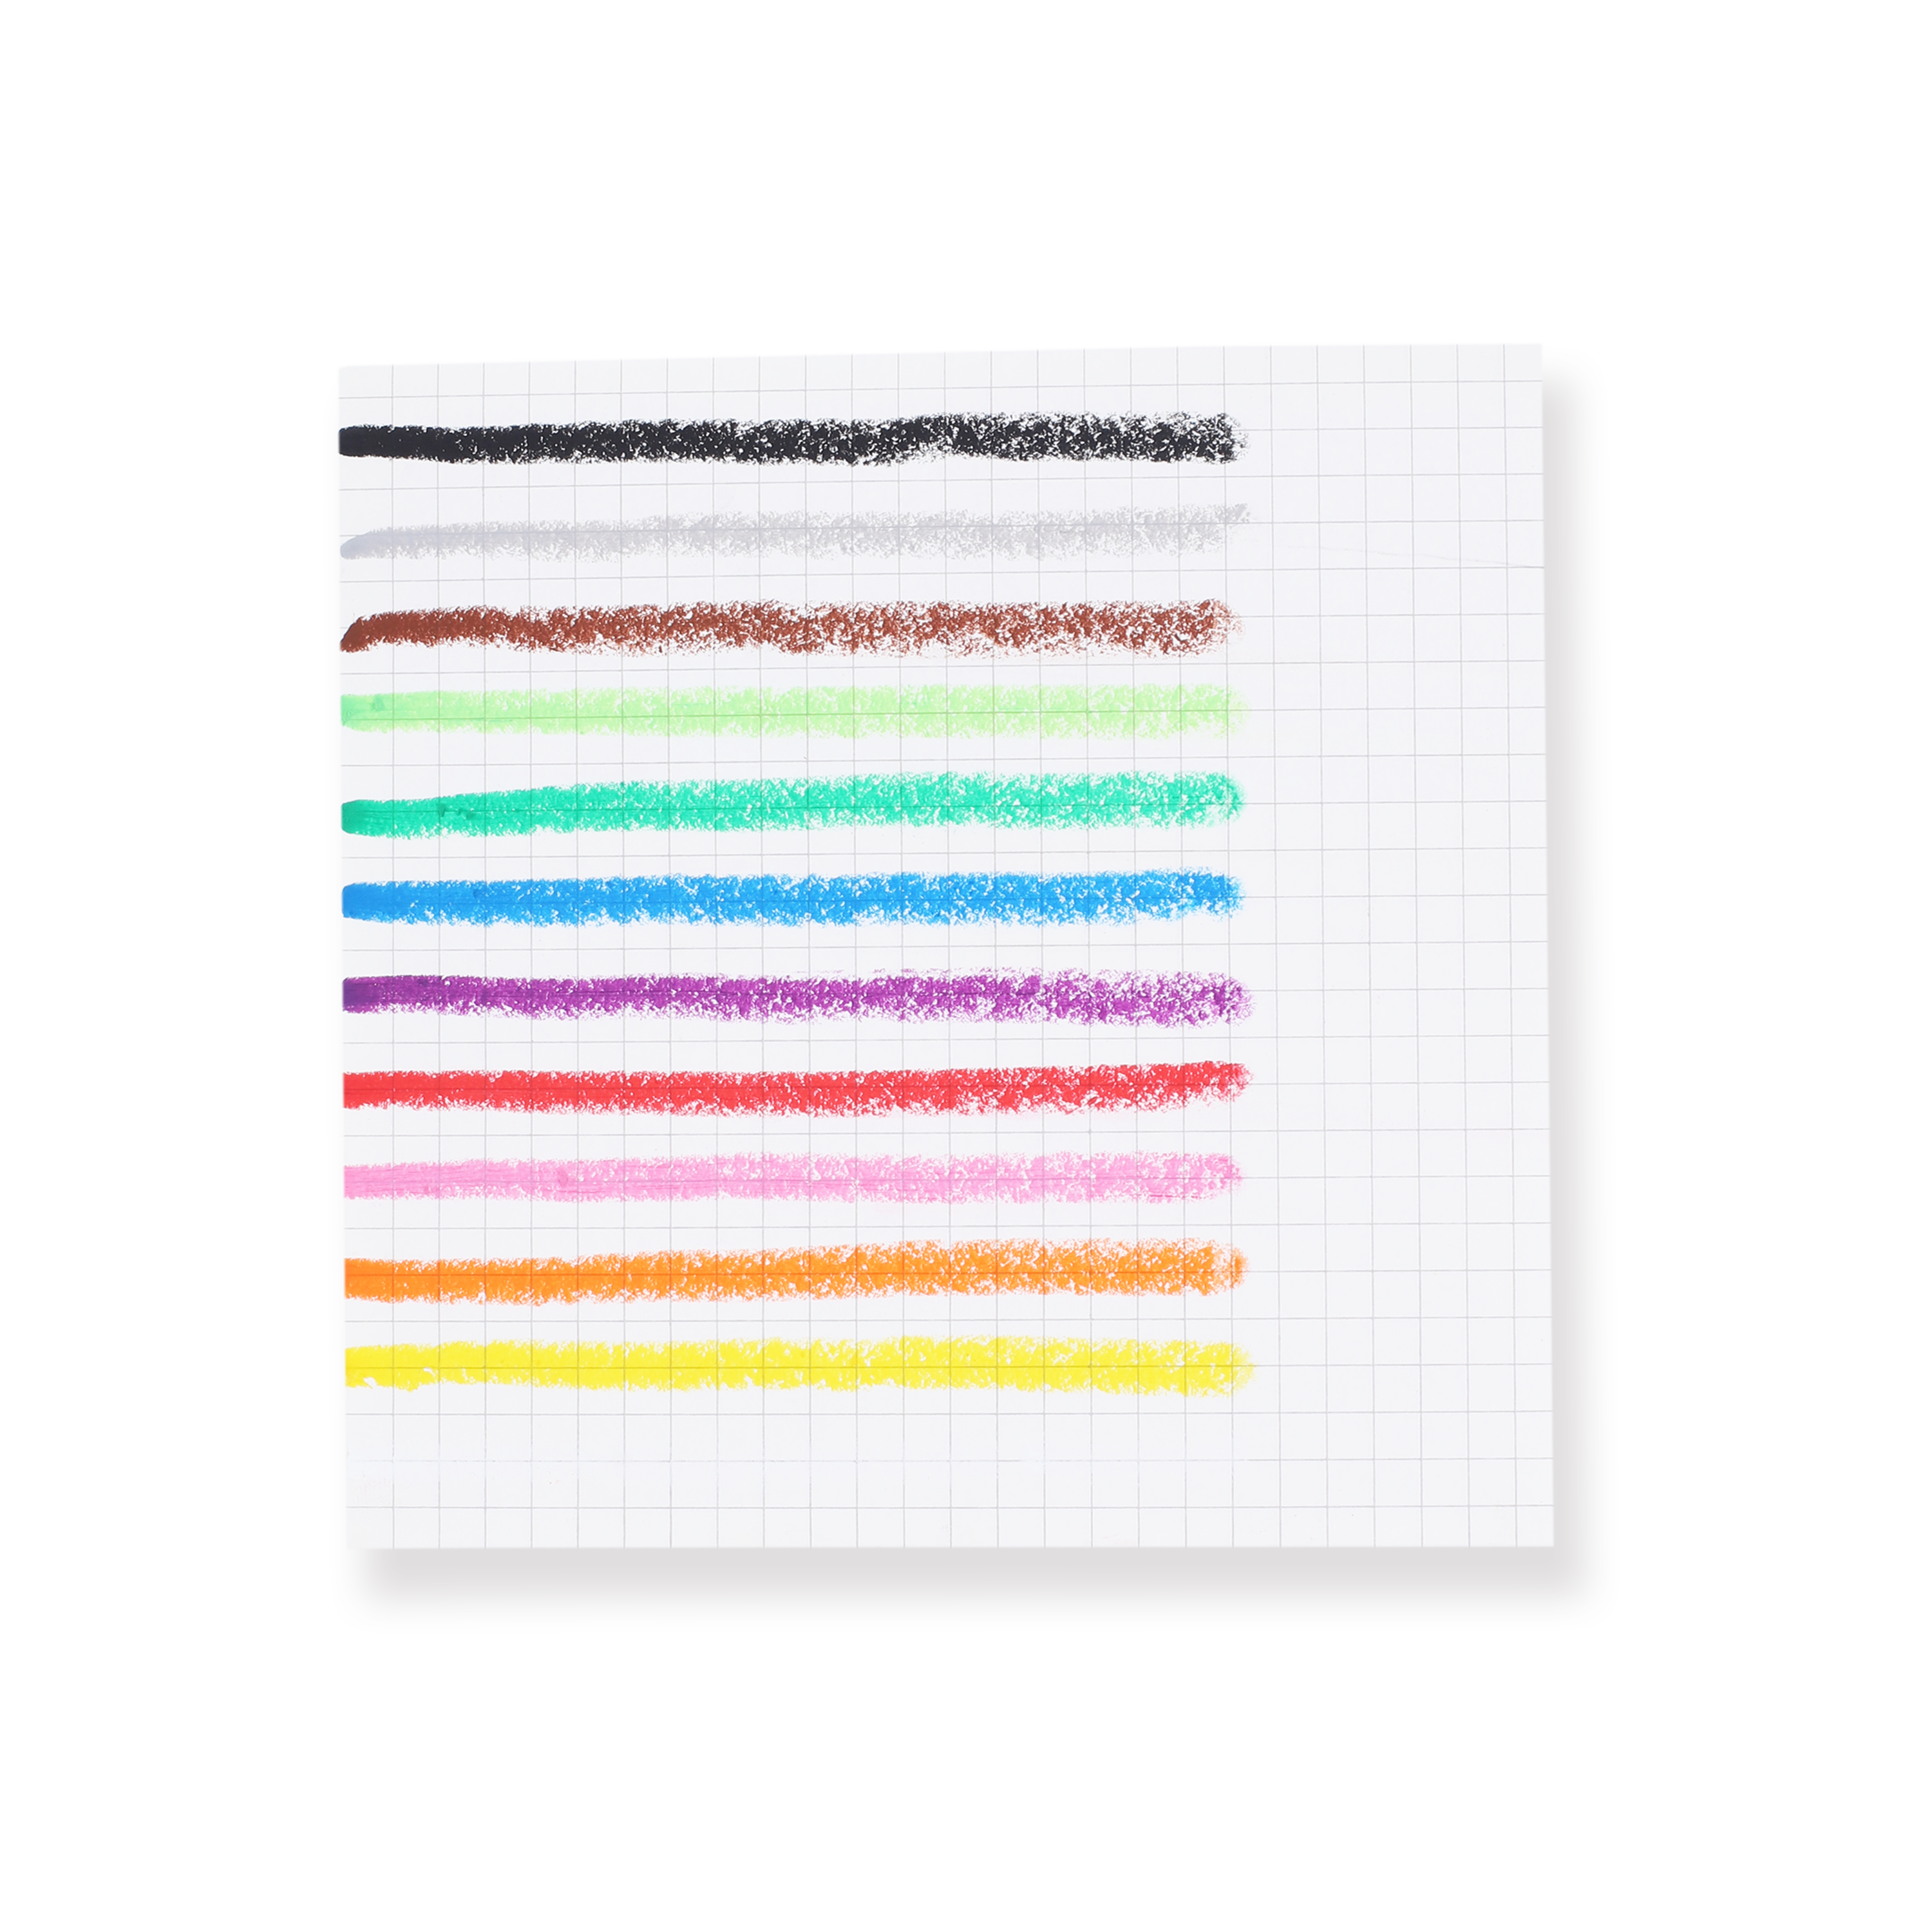 Mont Marte Water-soluble Oil Pastels - Set of 12 - Stationery Pal